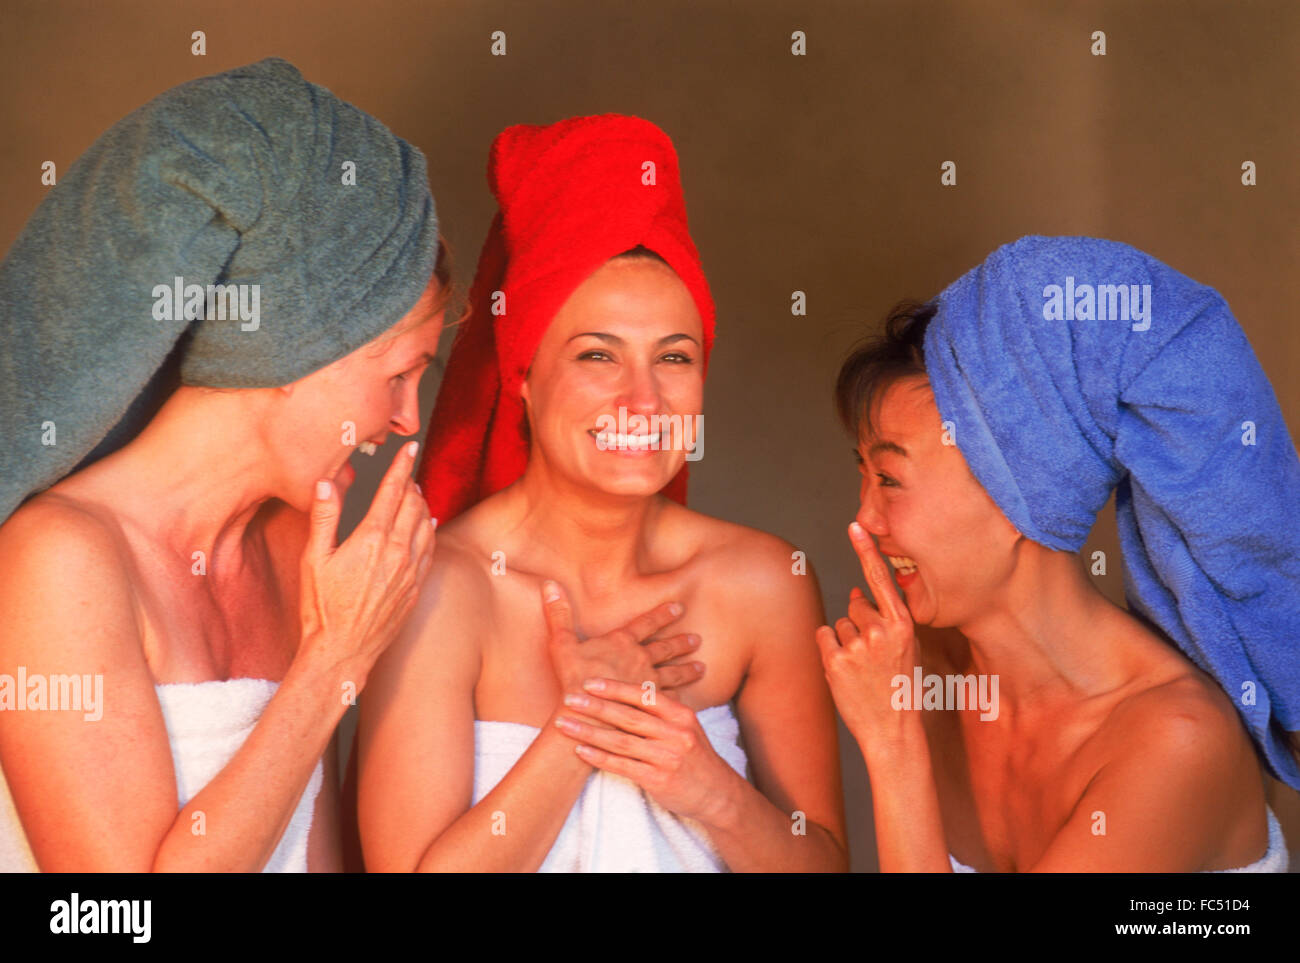 Three women of ethnic mix with colorful bath towels sharing gossip and laughing Stock Photo